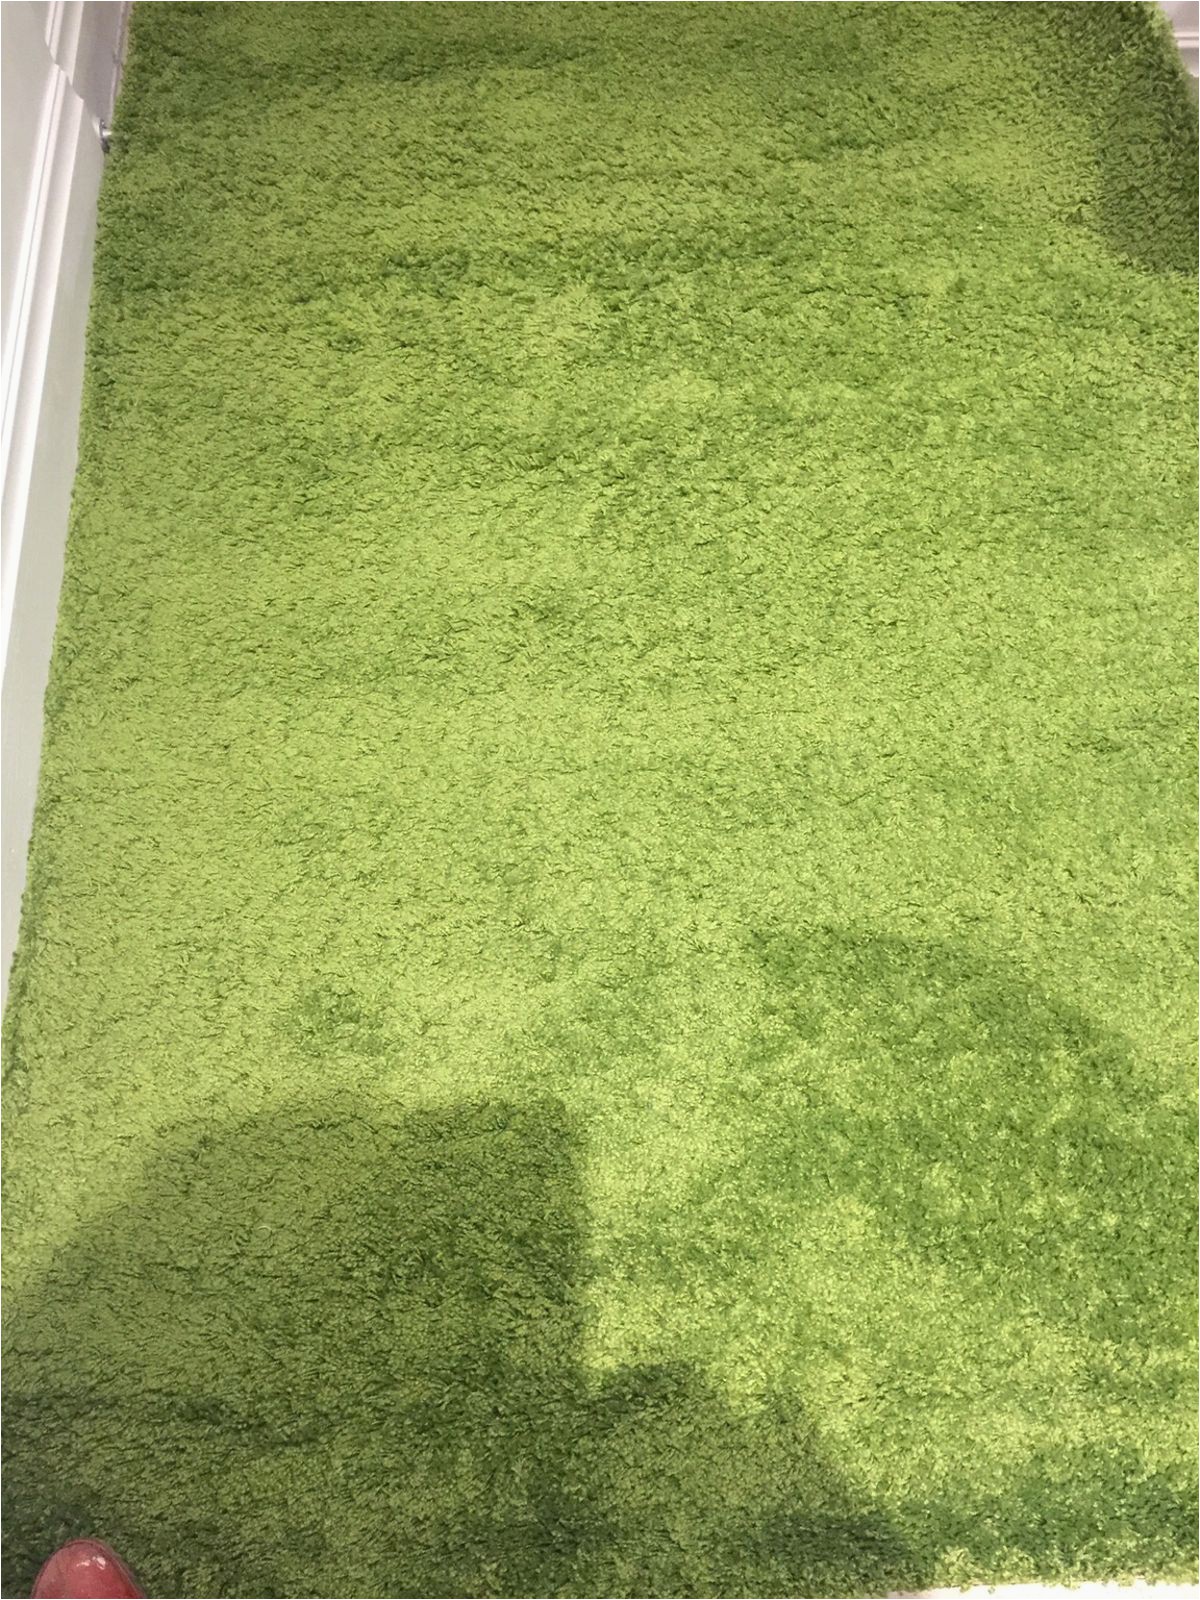 Lime Green area Rug Ikea Ikea Lime Green Rug In Cw8 Hartford for £20 00 for Sale